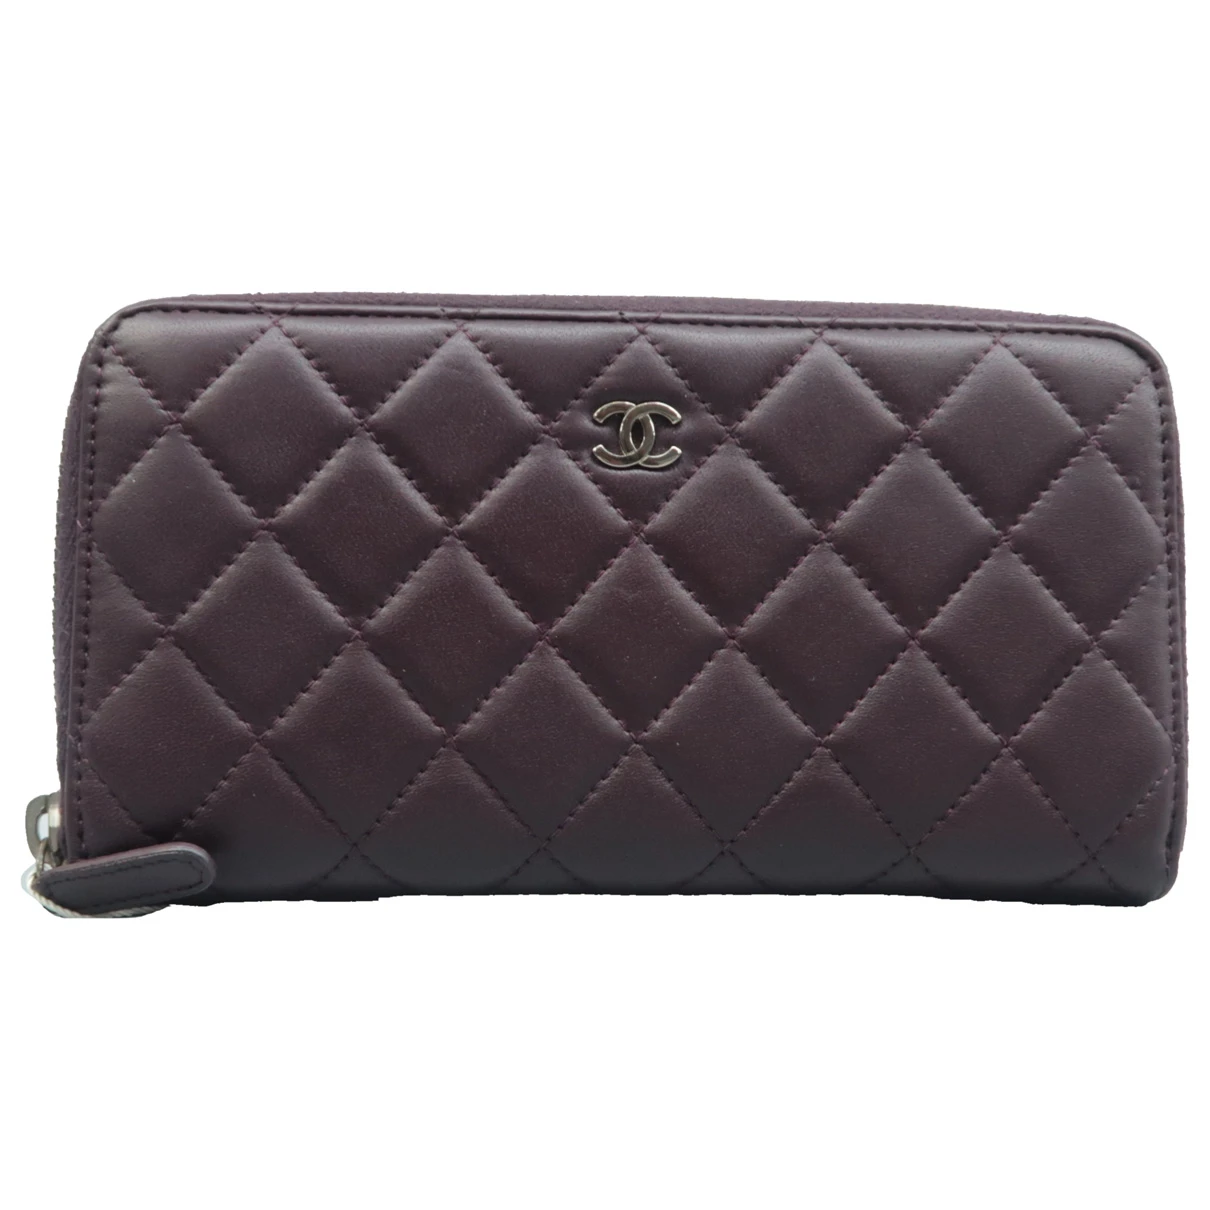 Pre-owned Chanel Leather Wallet In Purple